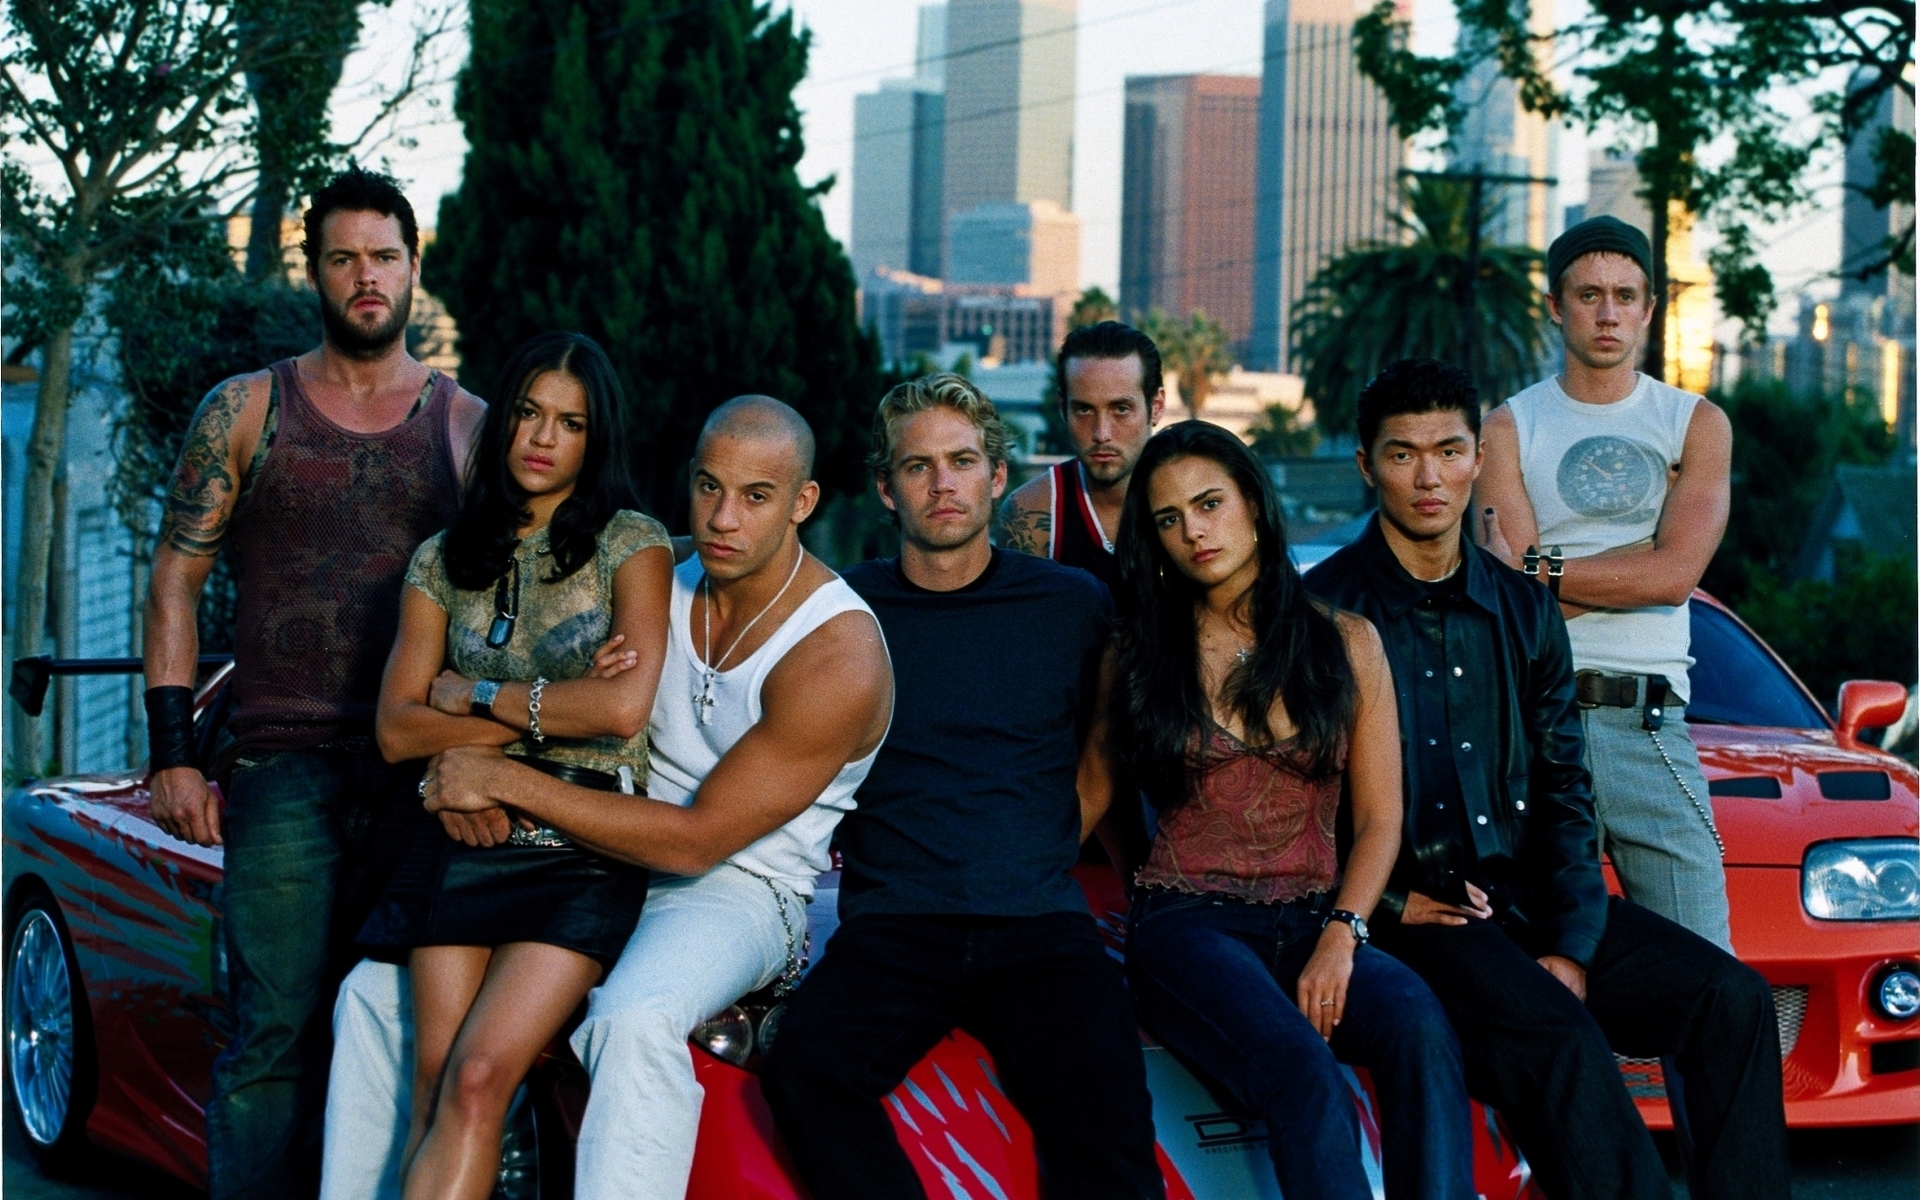 fast & furious, paul walker, the fast and the furious, matt schulze, dominic toretto, rick yune, letty ortiz, movie, brian o'conner, chad lindberg, jesse (the fast and the furious), johnny tran, jordana brewster, mia toretto, michelle rodriguez, vin diesel, vince (fast & furious)